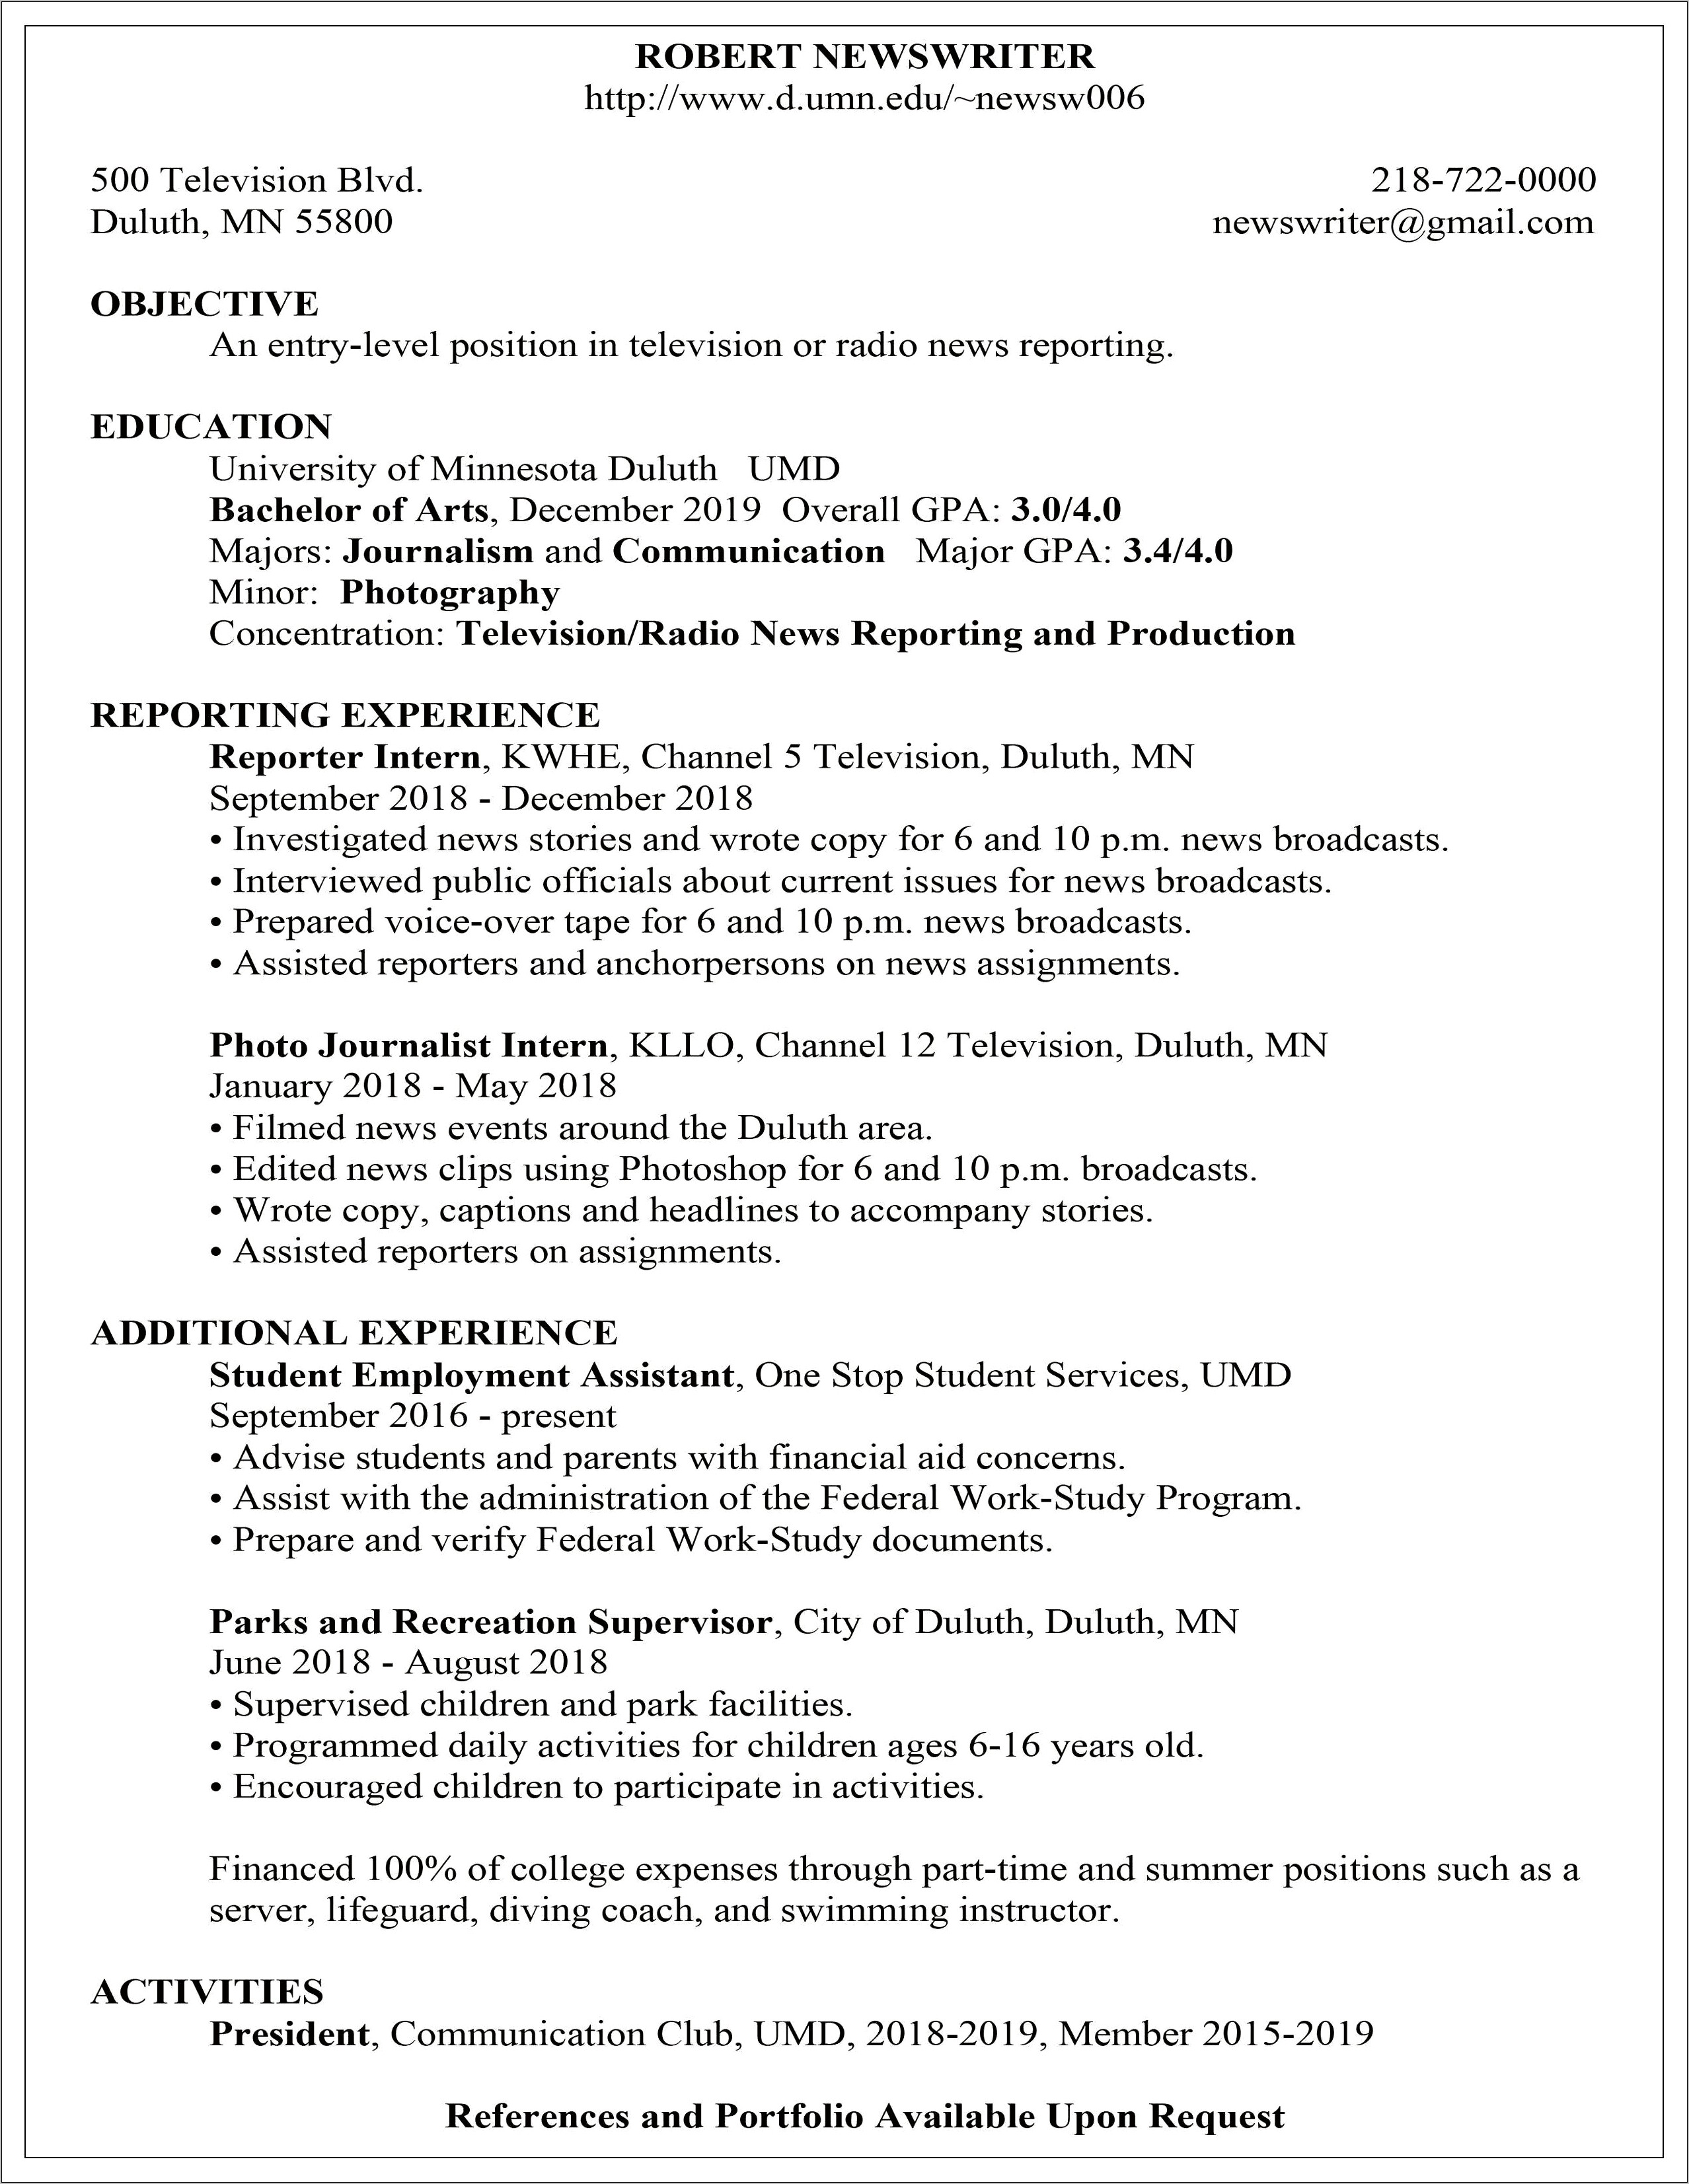 Resume Examples For 16 Yr Olds